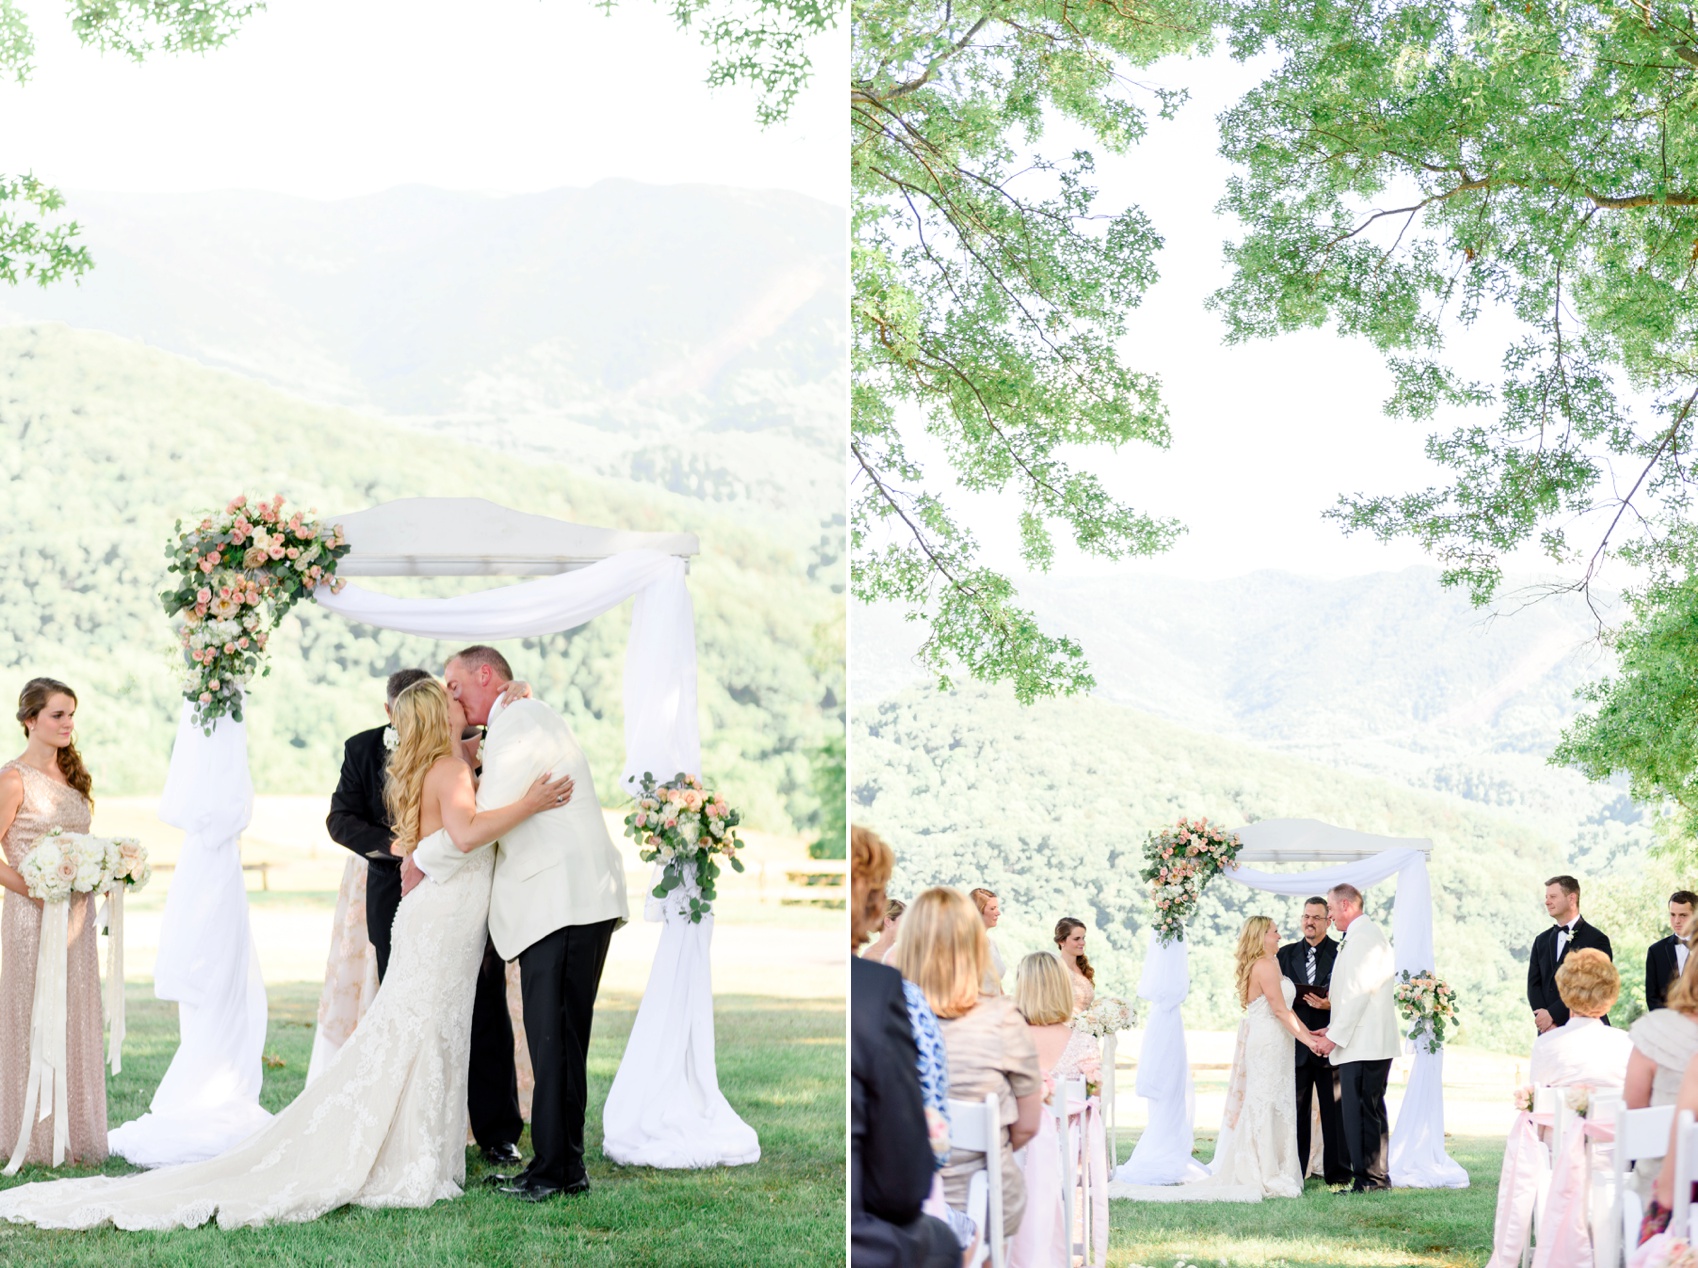 bride and groom first kiss